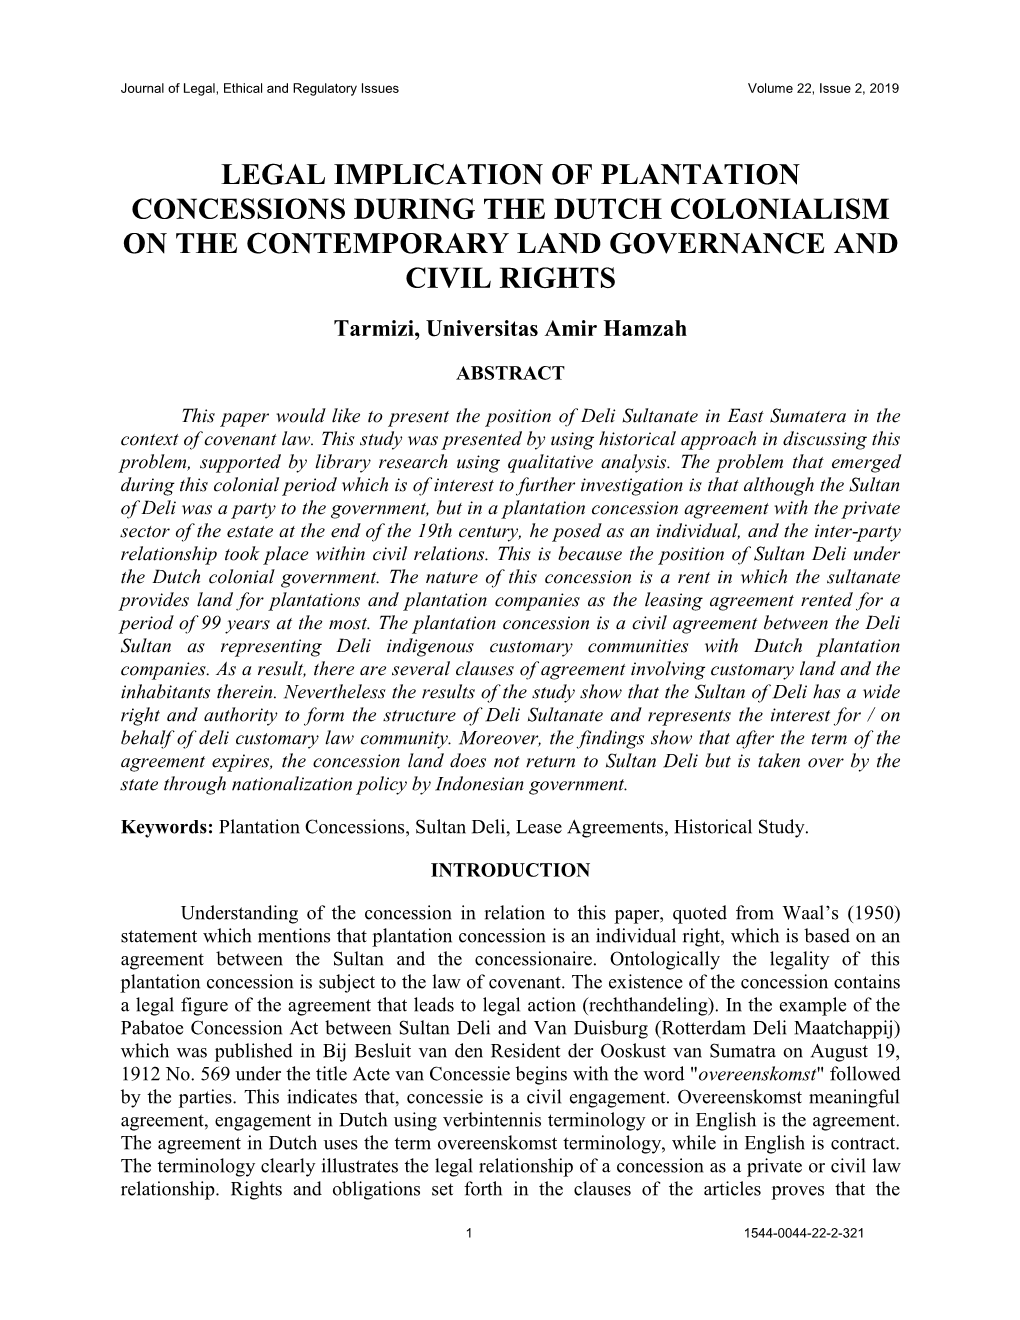 LEGAL IMPLICATION of PLANTATION CONCESSIONS DURING the DUTCH COLONIALISM on the CONTEMPORARY LAND GOVERNANCE and CIVIL RIGHTS Tarmizi, Universitas Amir Hamzah